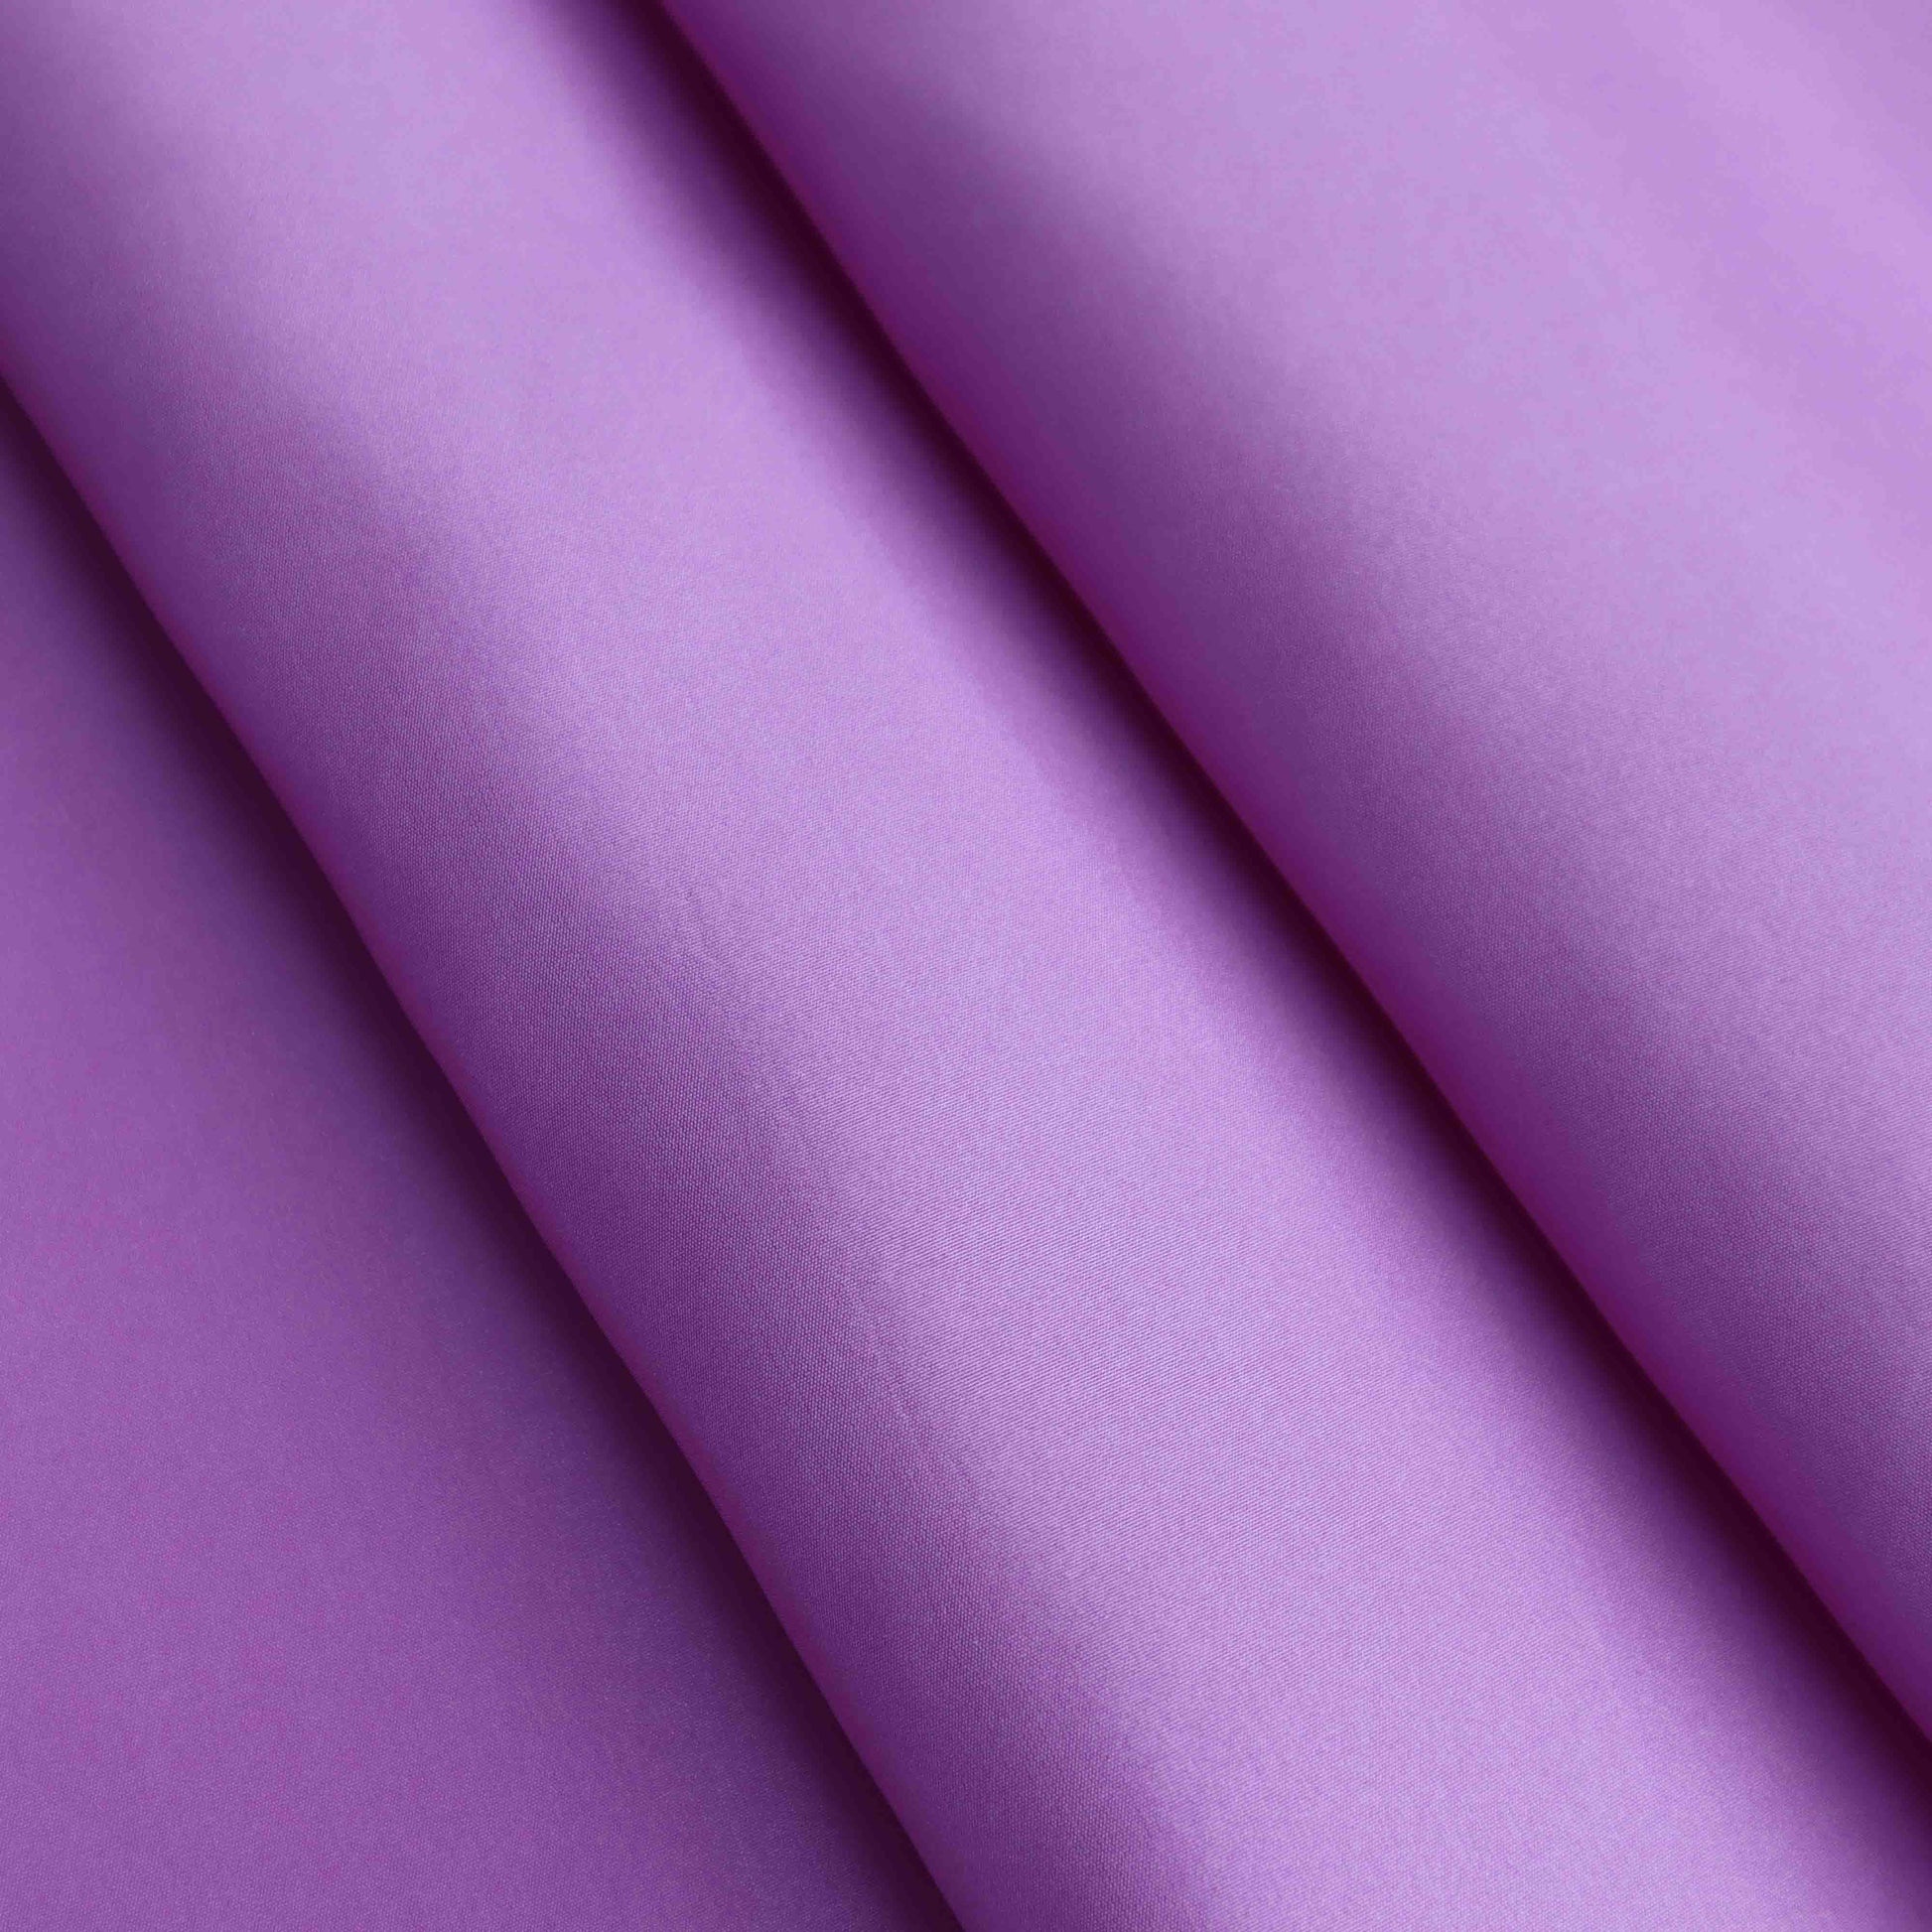 A lightweight Habutai lining made from Silk in Mulberry. This ultralight silk lining comes with an incredibly smooth and cool hand feel.